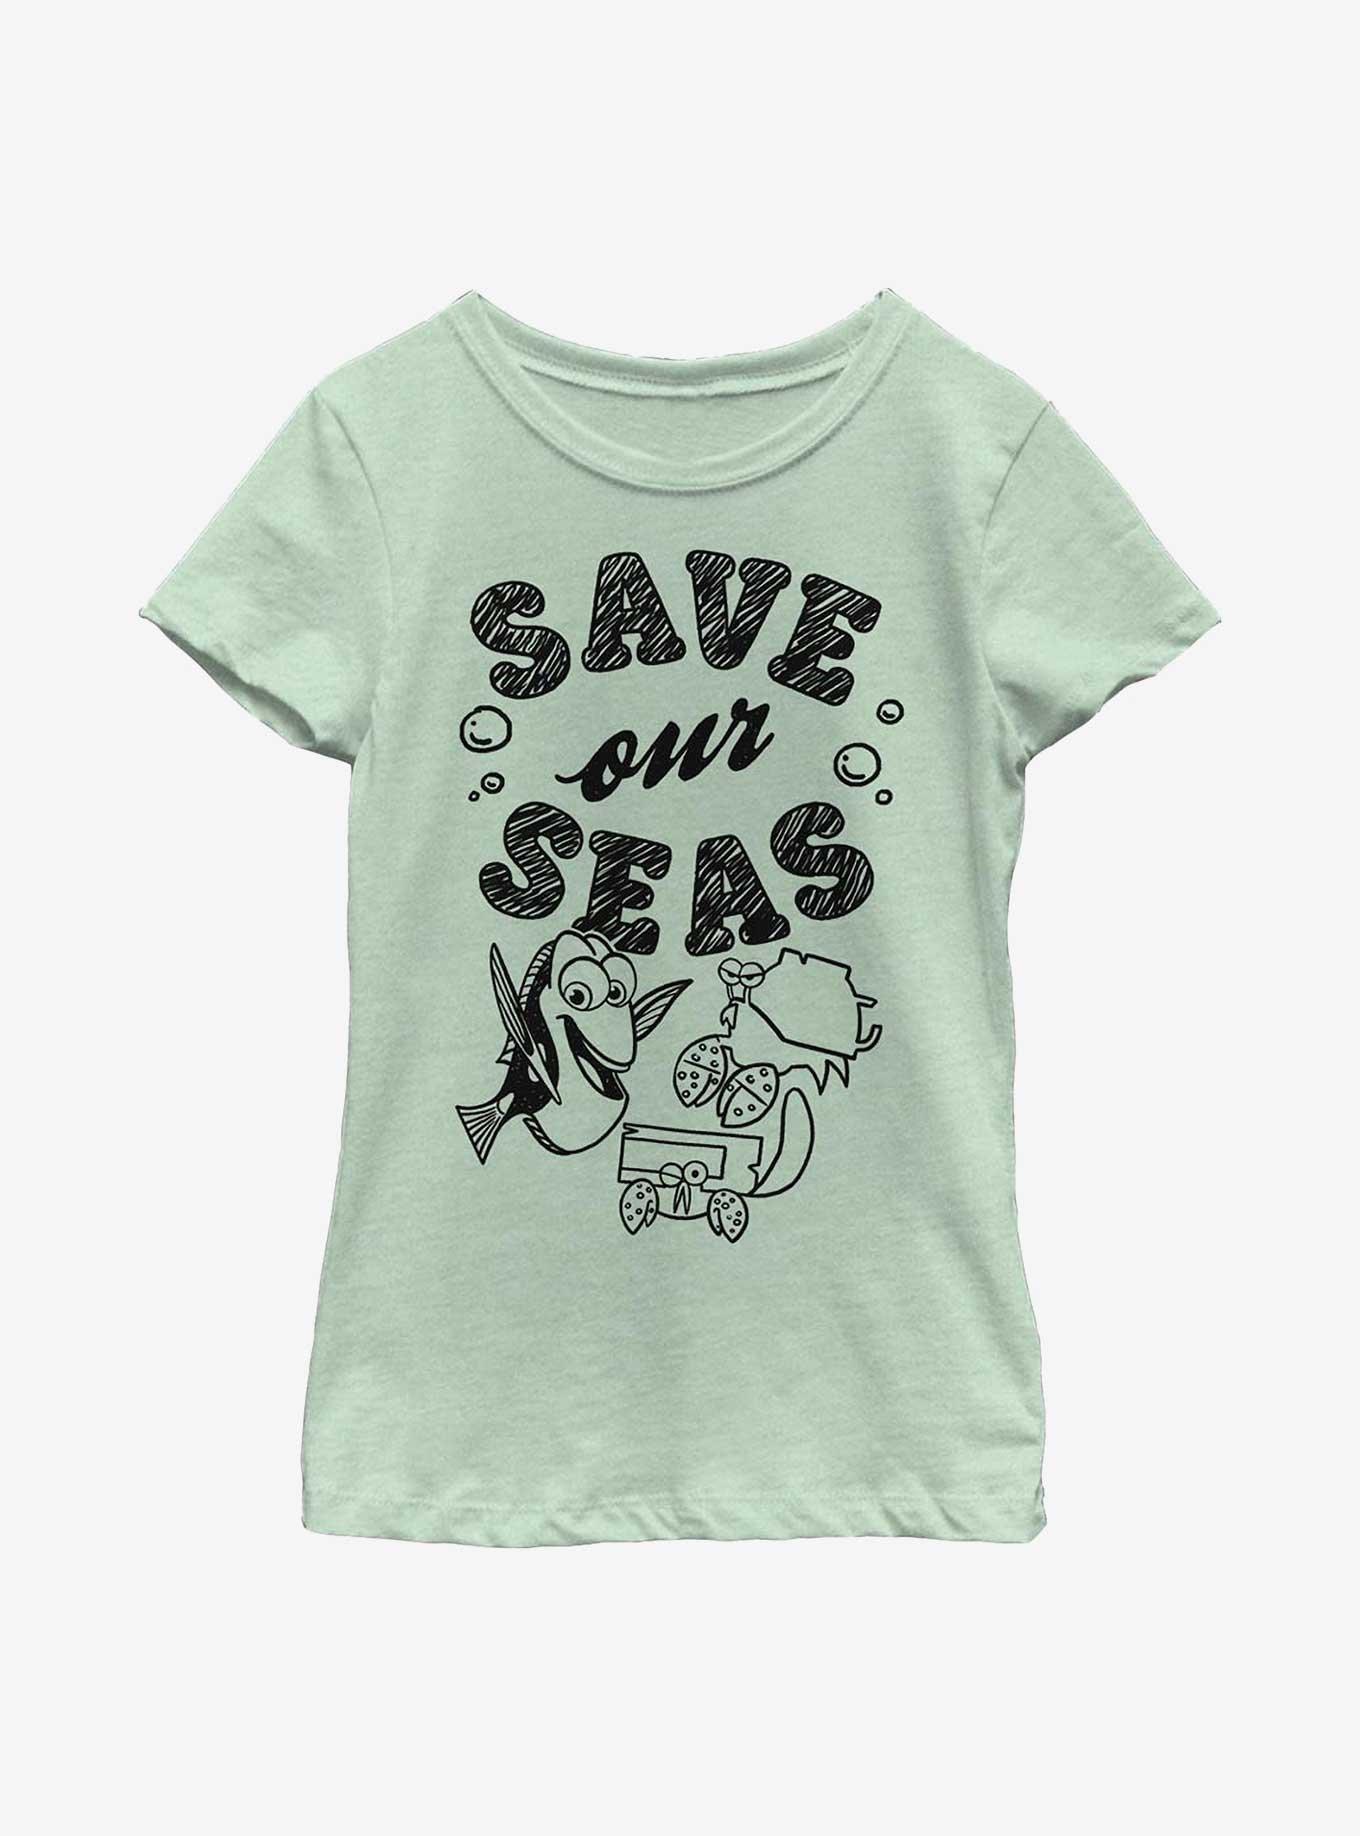 Disney Pixar Finding Nemo Save Our Seas Dory Youth Girls T-Shirt, MINT, hi-res